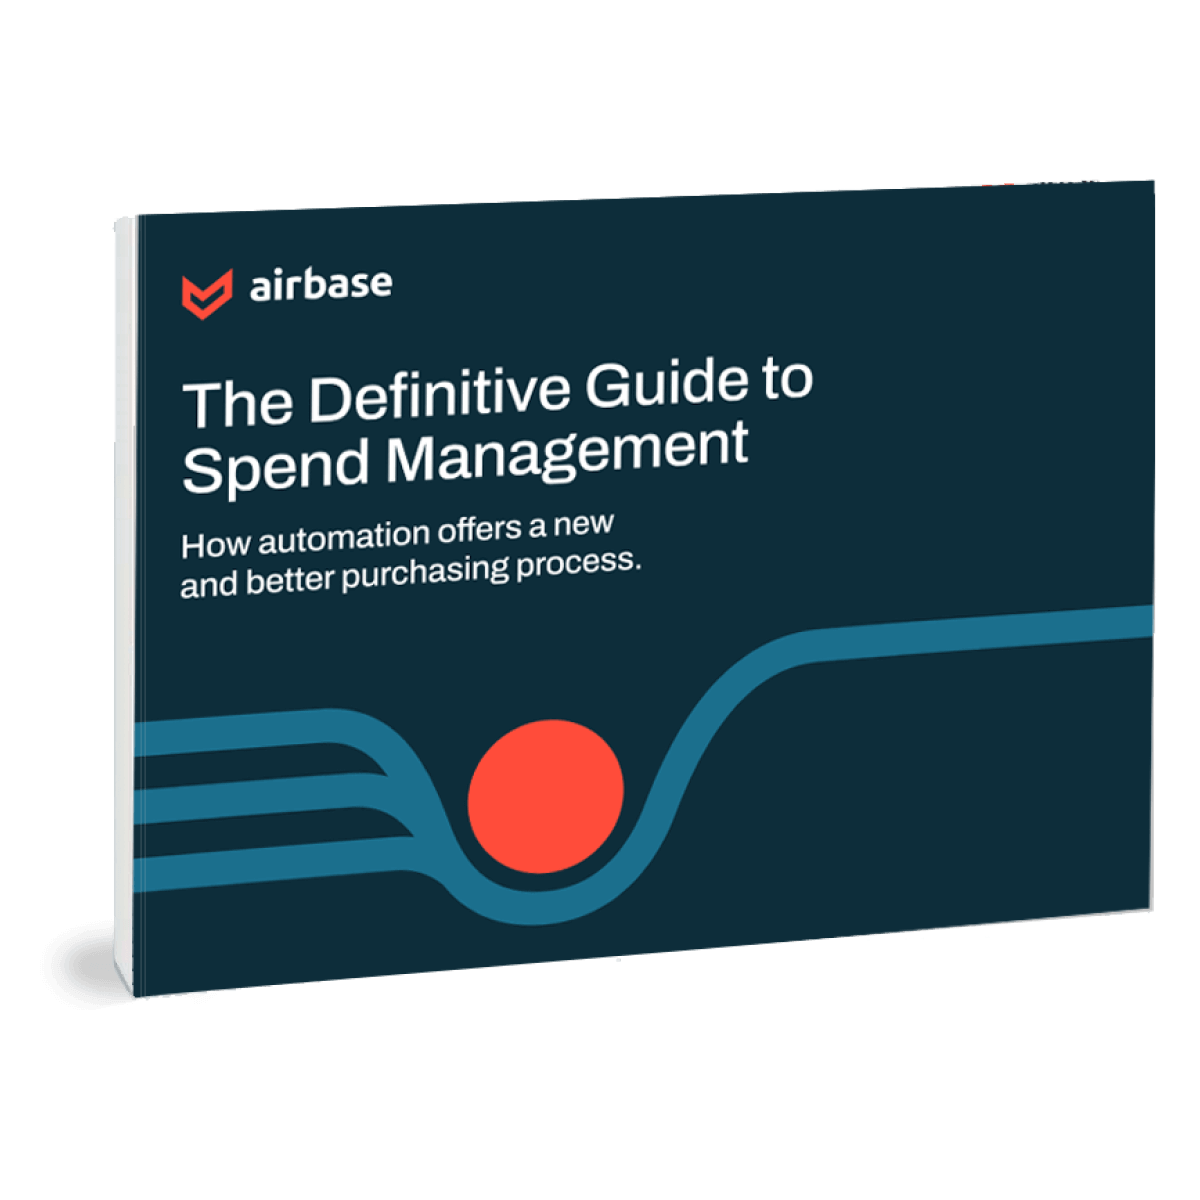 The Definitive Guide to Spend Management